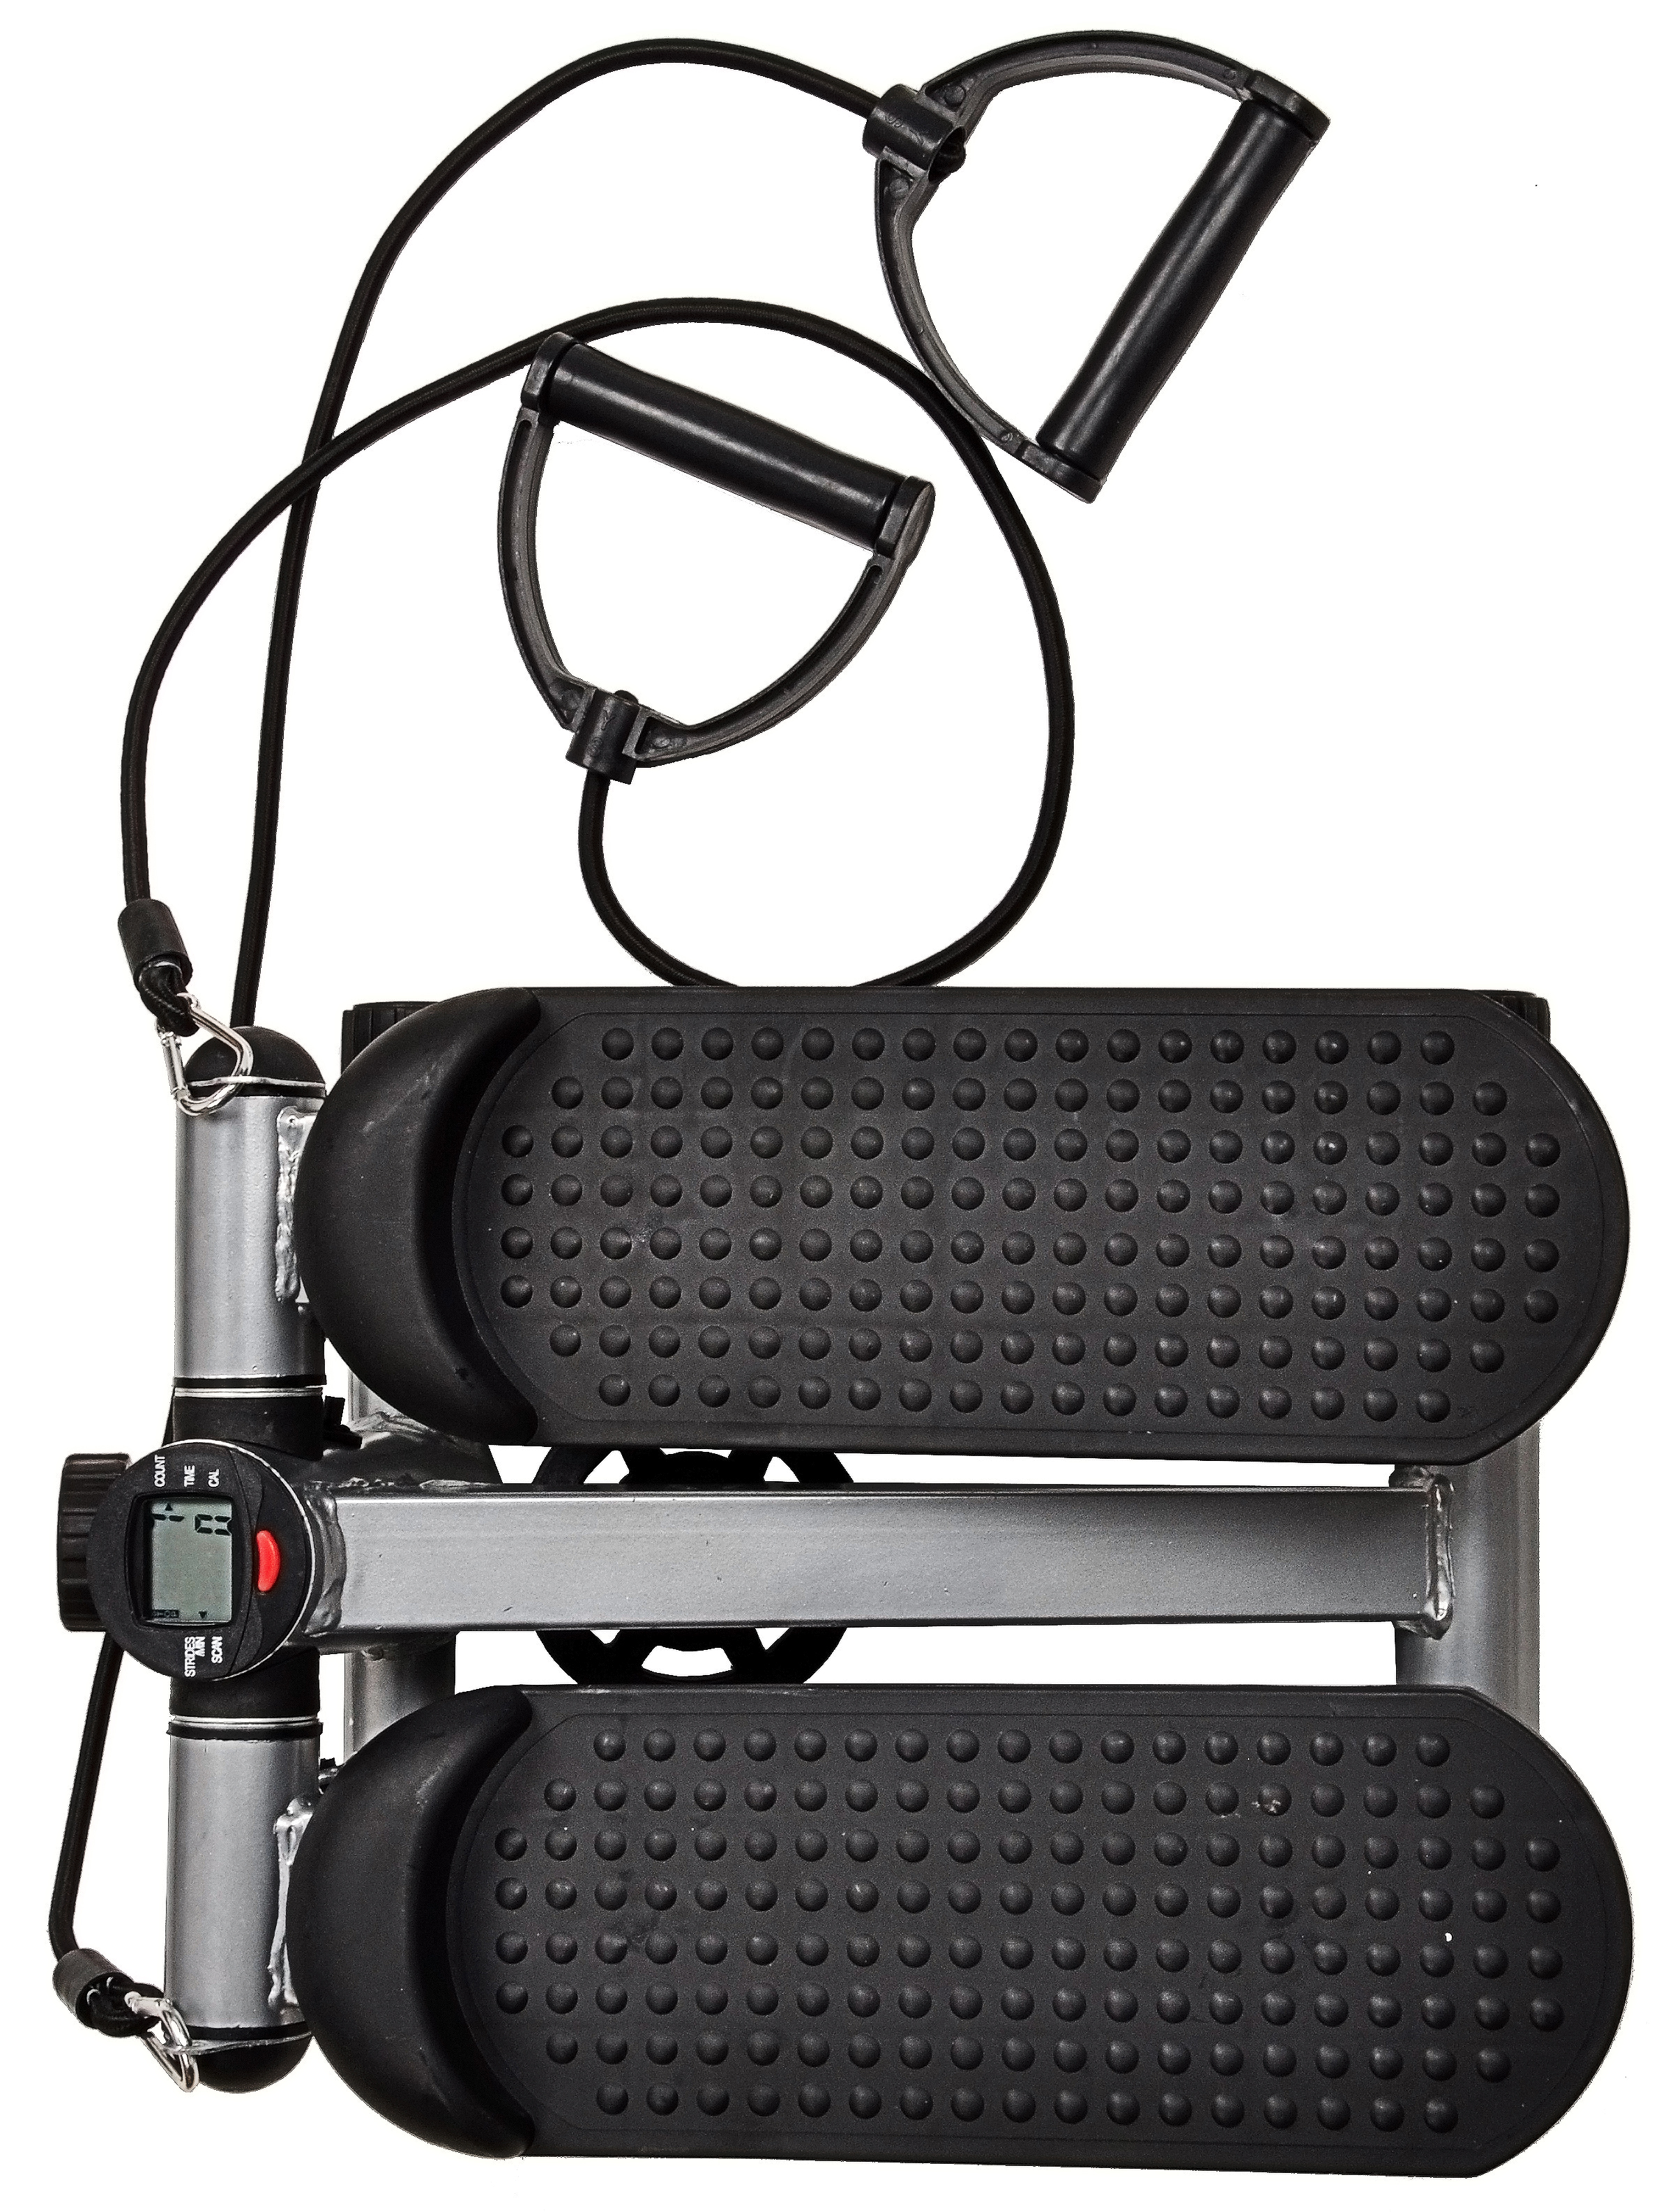 BalanceFrom Adjustable Mini Stepper with LCD Monitor Stepping Machine, Comes with Resistance Bands - image 3 of 7